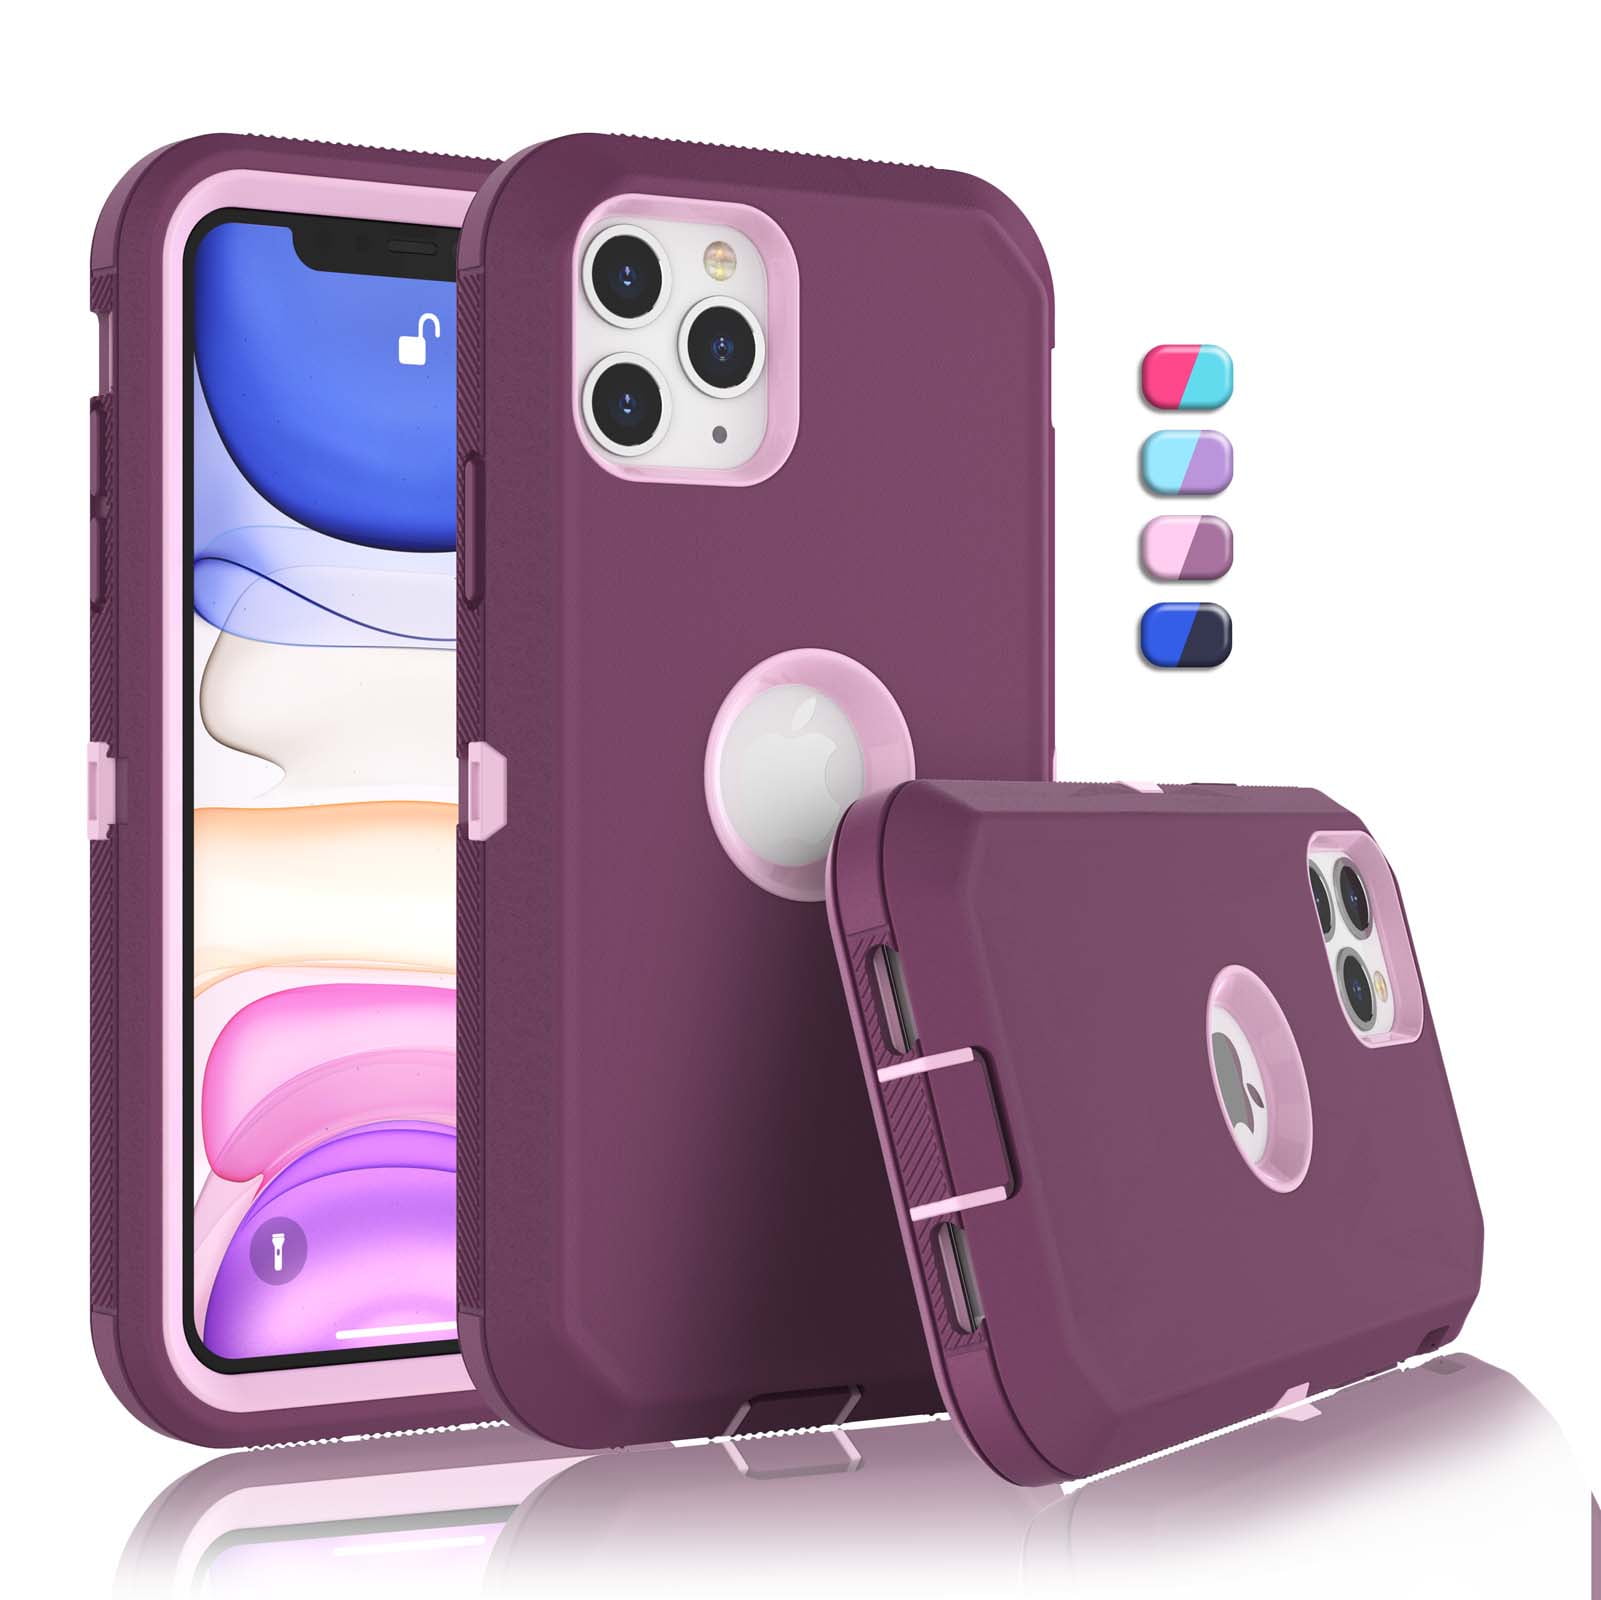 Iphone 11 Pro Max Cases Sturdy Phone Case For Iphone 11 Pro Max 65